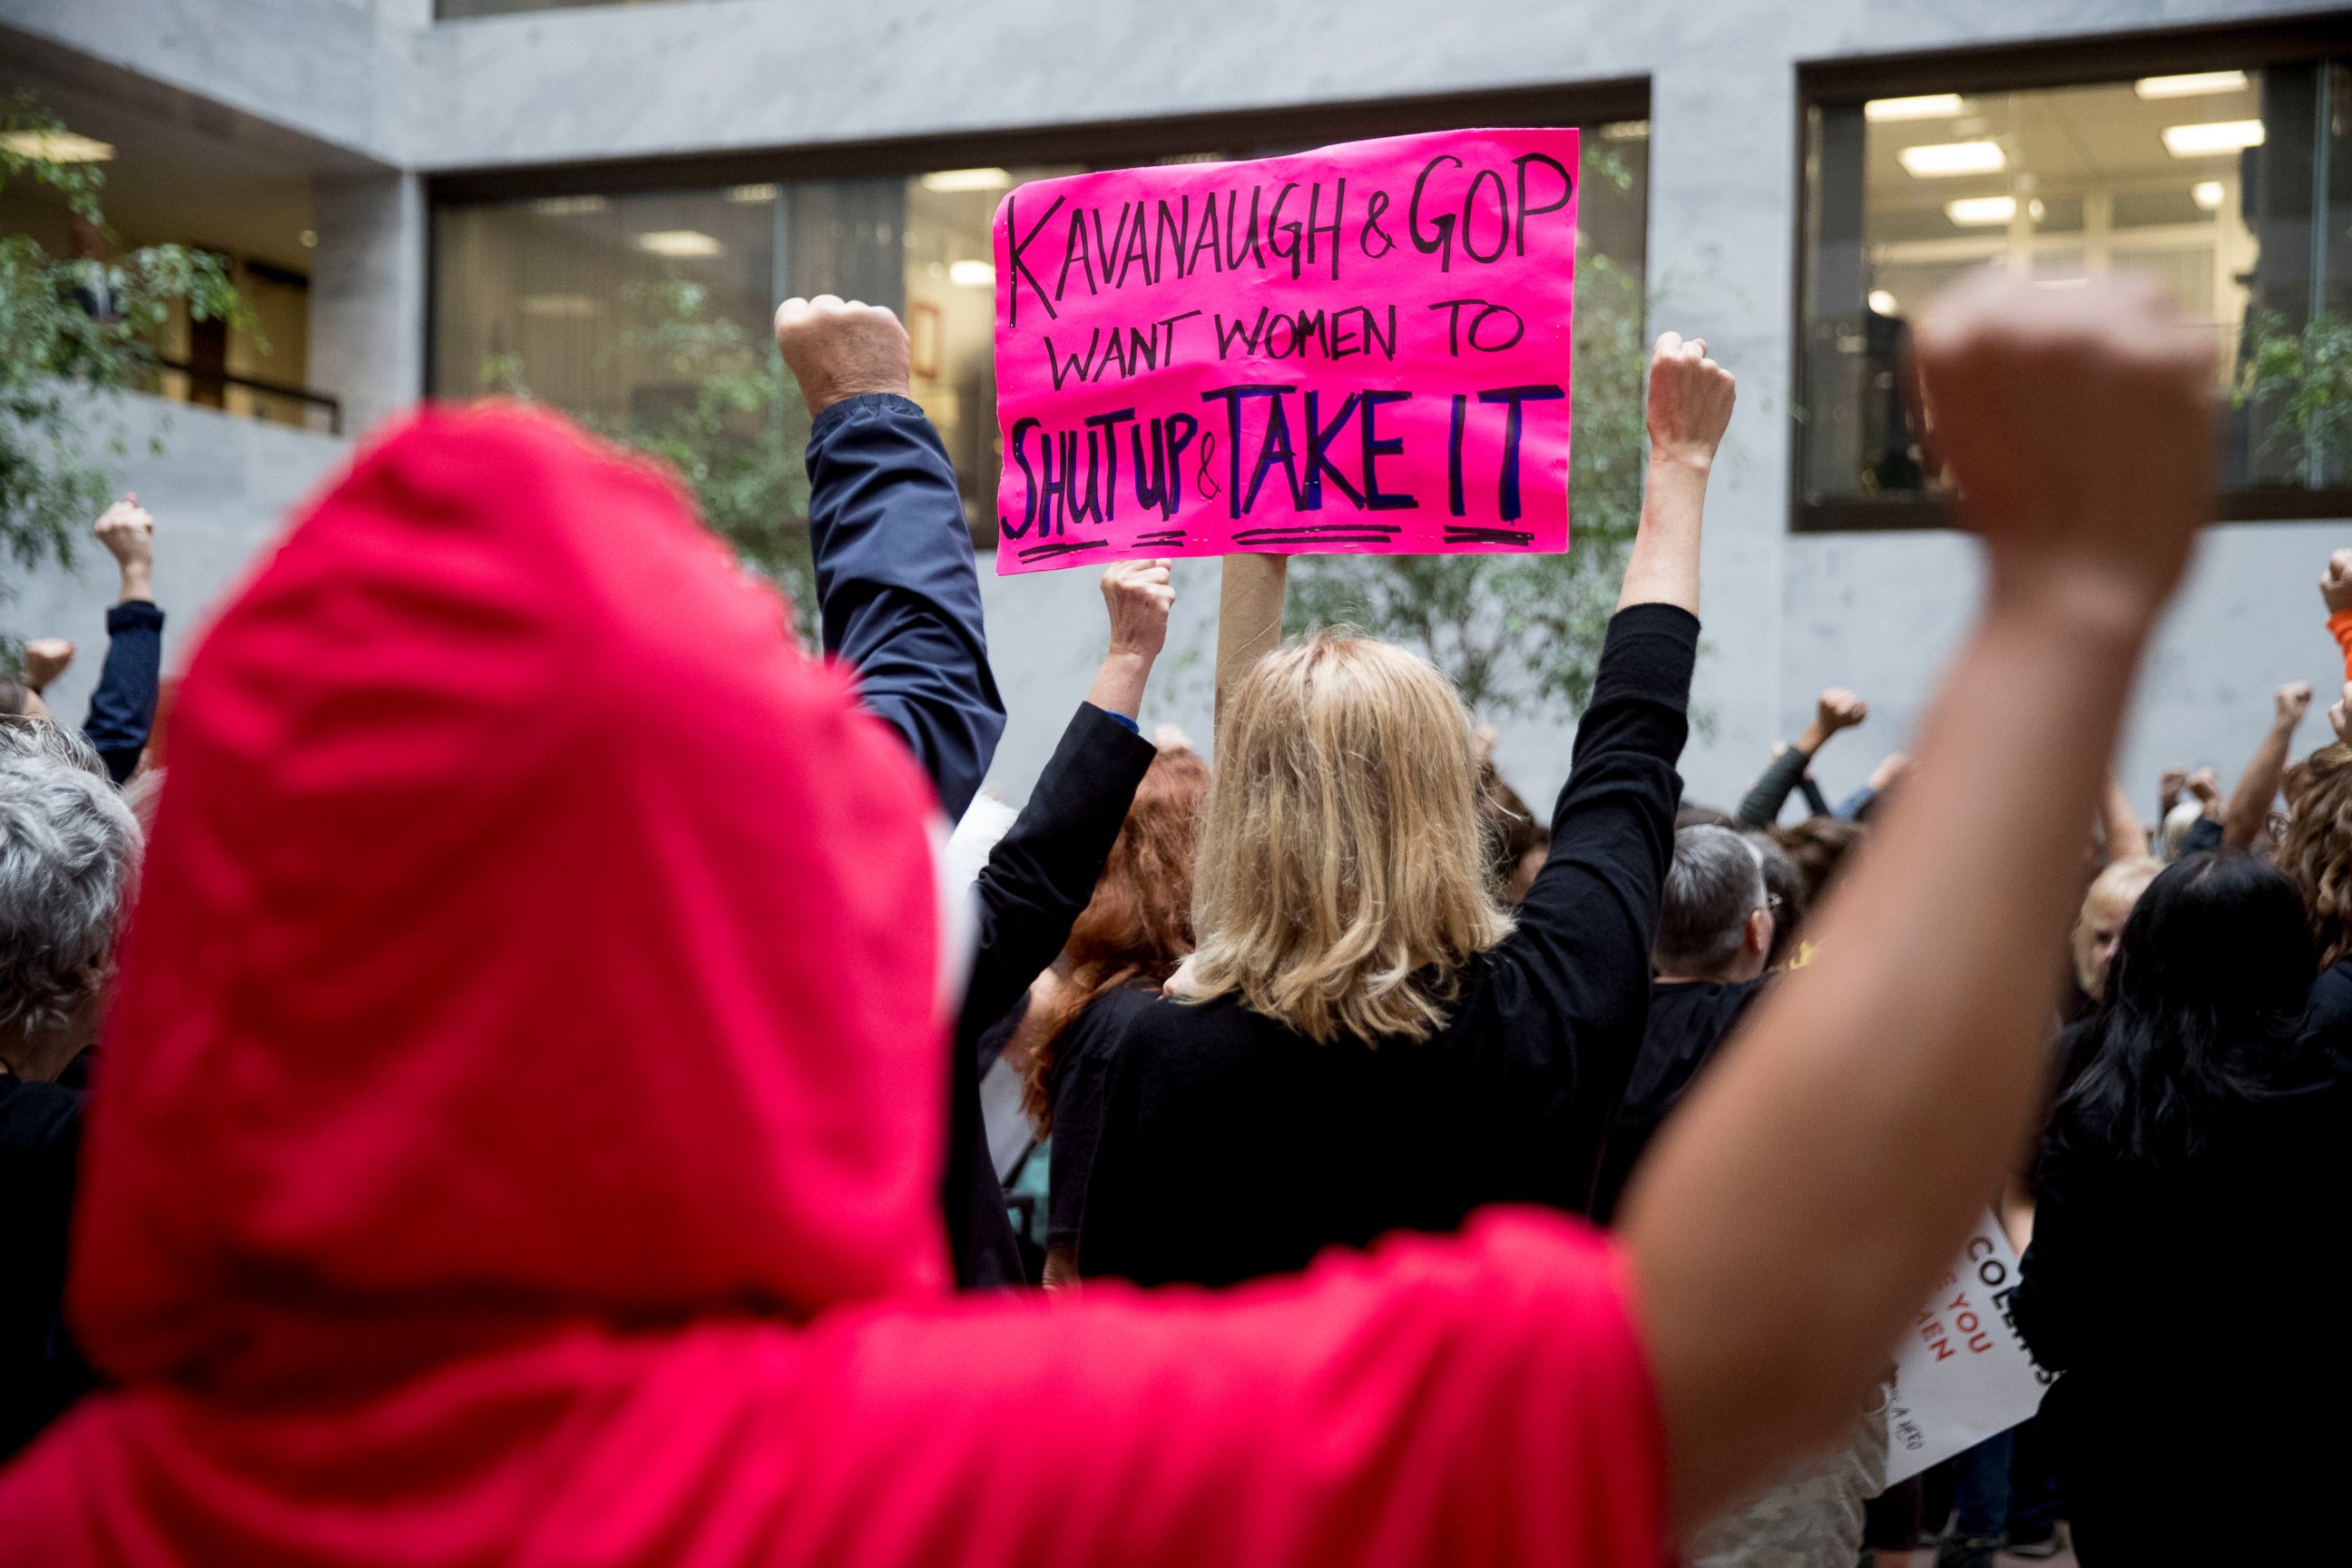 A protester of Supreme Court nominee Brett Kavanaugh wears a costume from the show "The Handmaid's Tale," and another protester holds up a sign that reads "Kavanaugh and GOP Want Women to Shut Up and Take It" in Washington, Monday, Sept. 24, 2018.